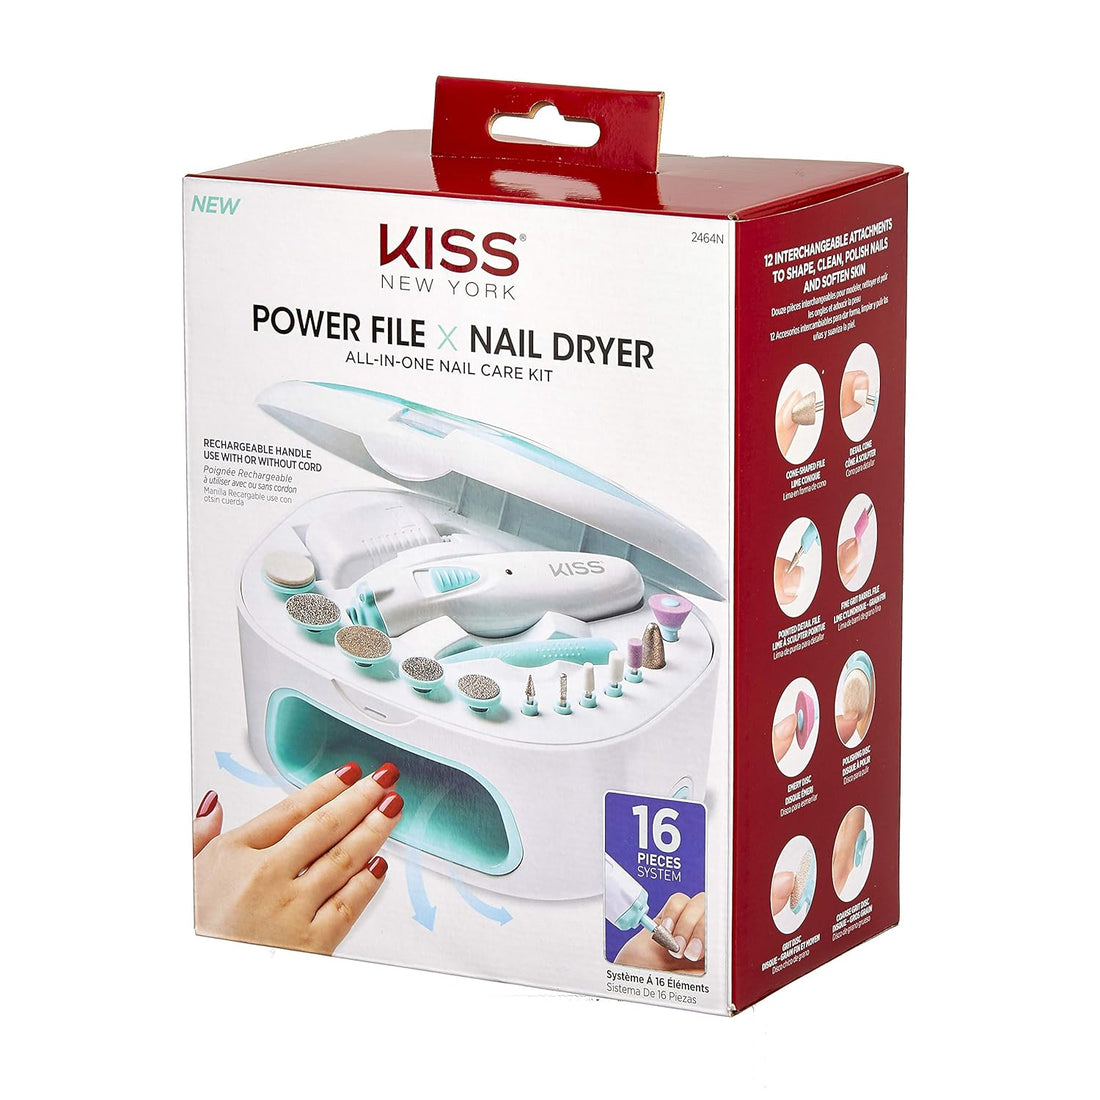 Power File X Nail Dryer All-In-One Nail Care Kit, Cordless Rechargeable Handle, Salon Style Nail Dryer, 12 Interchangeable Styling Attachments, Ergonomic Design, Storage Case, 16 Pcs., 1.14 Lbs.